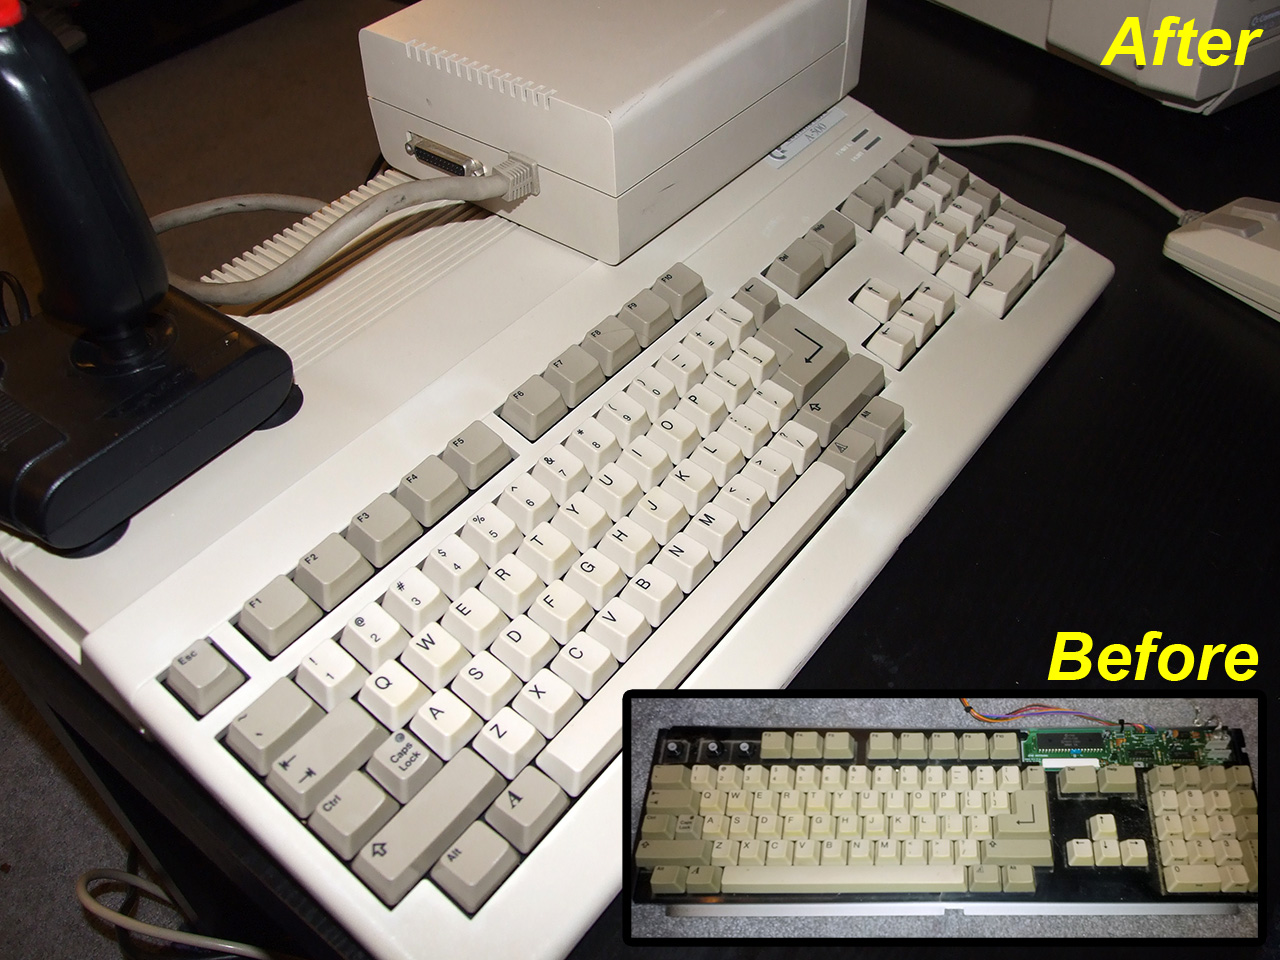 Amiga 500 - before and after Retr0brite